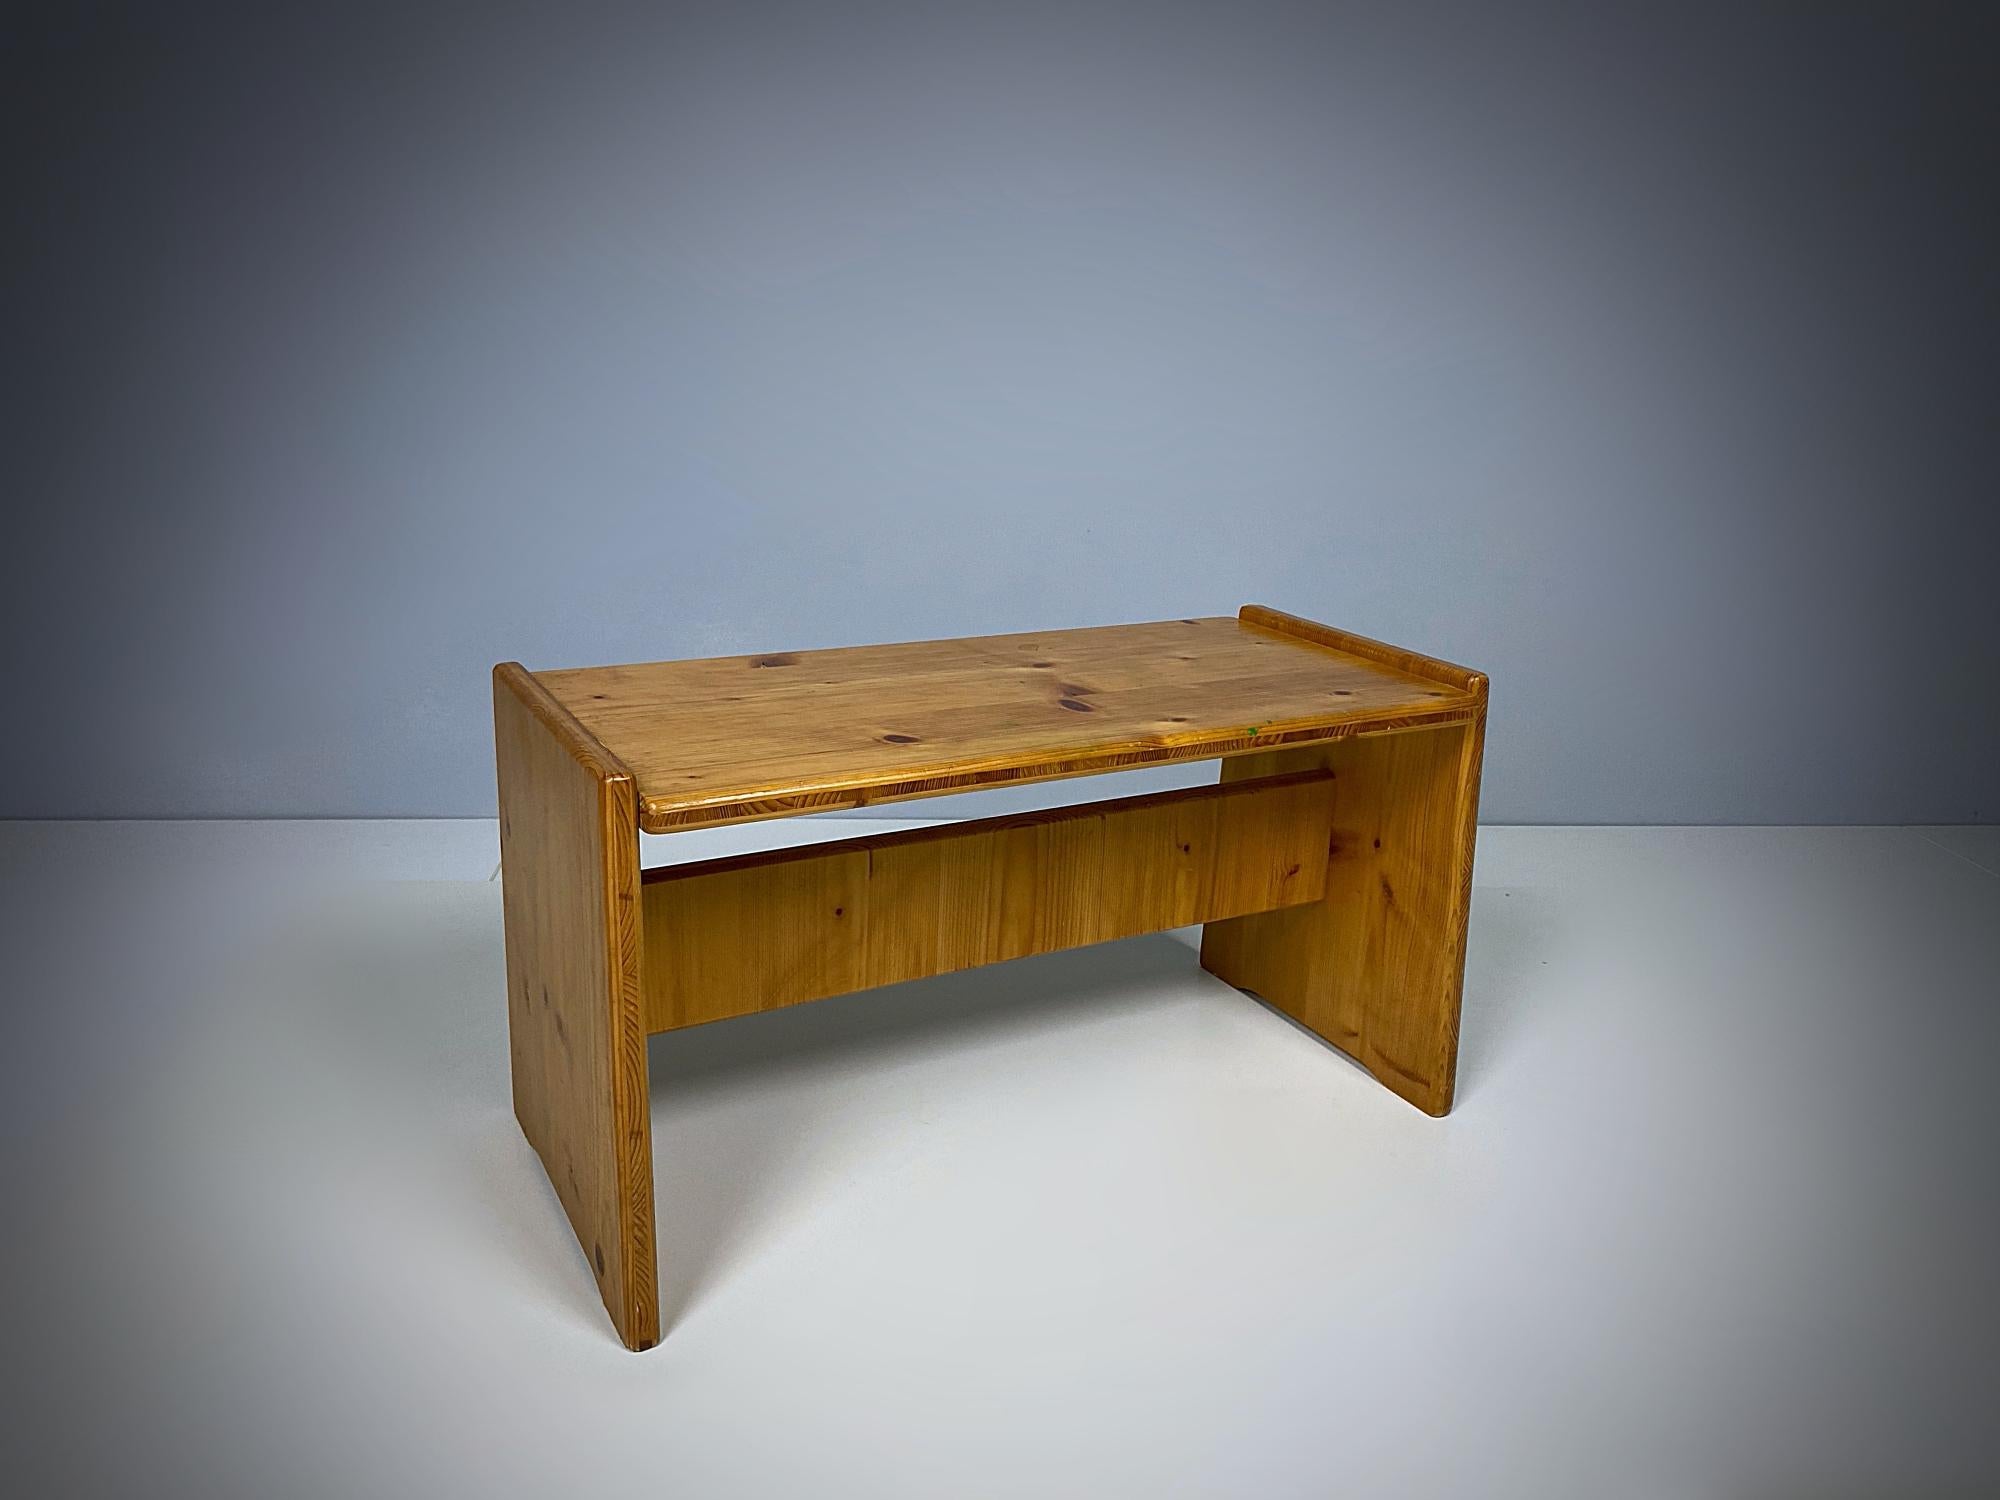 Hand-Crafted Mid-Century Modern Swedish Minimalism Pine Stool, 1960s, Sweden For Sale